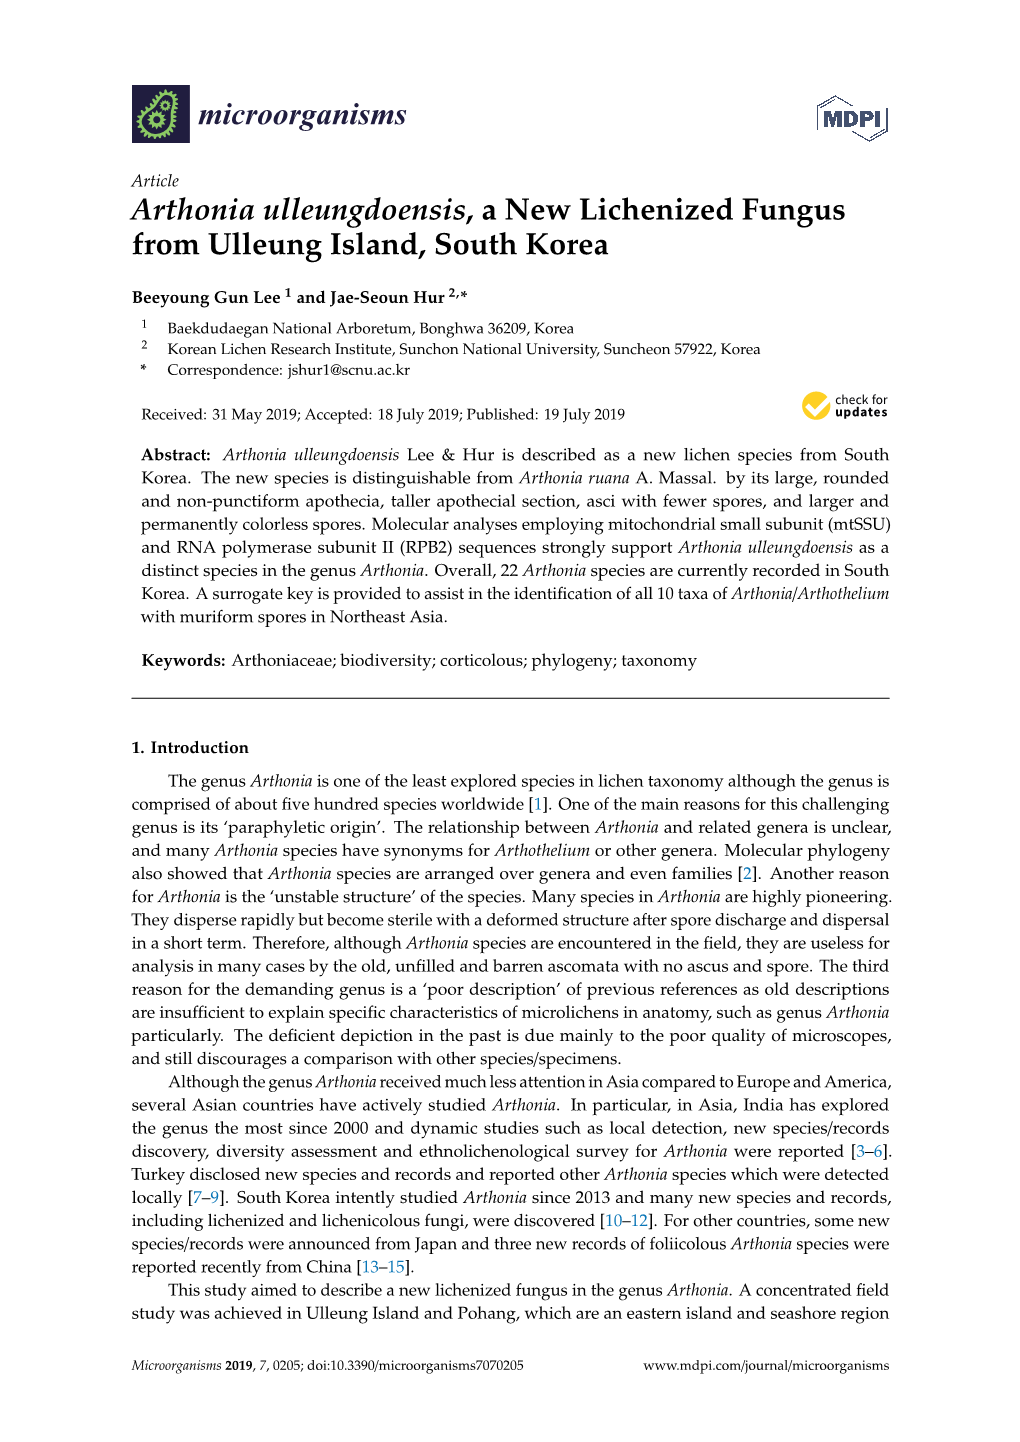 Arthonia Ulleungdoensis, a New Lichenized Fungus from Ulleung Island, South Korea